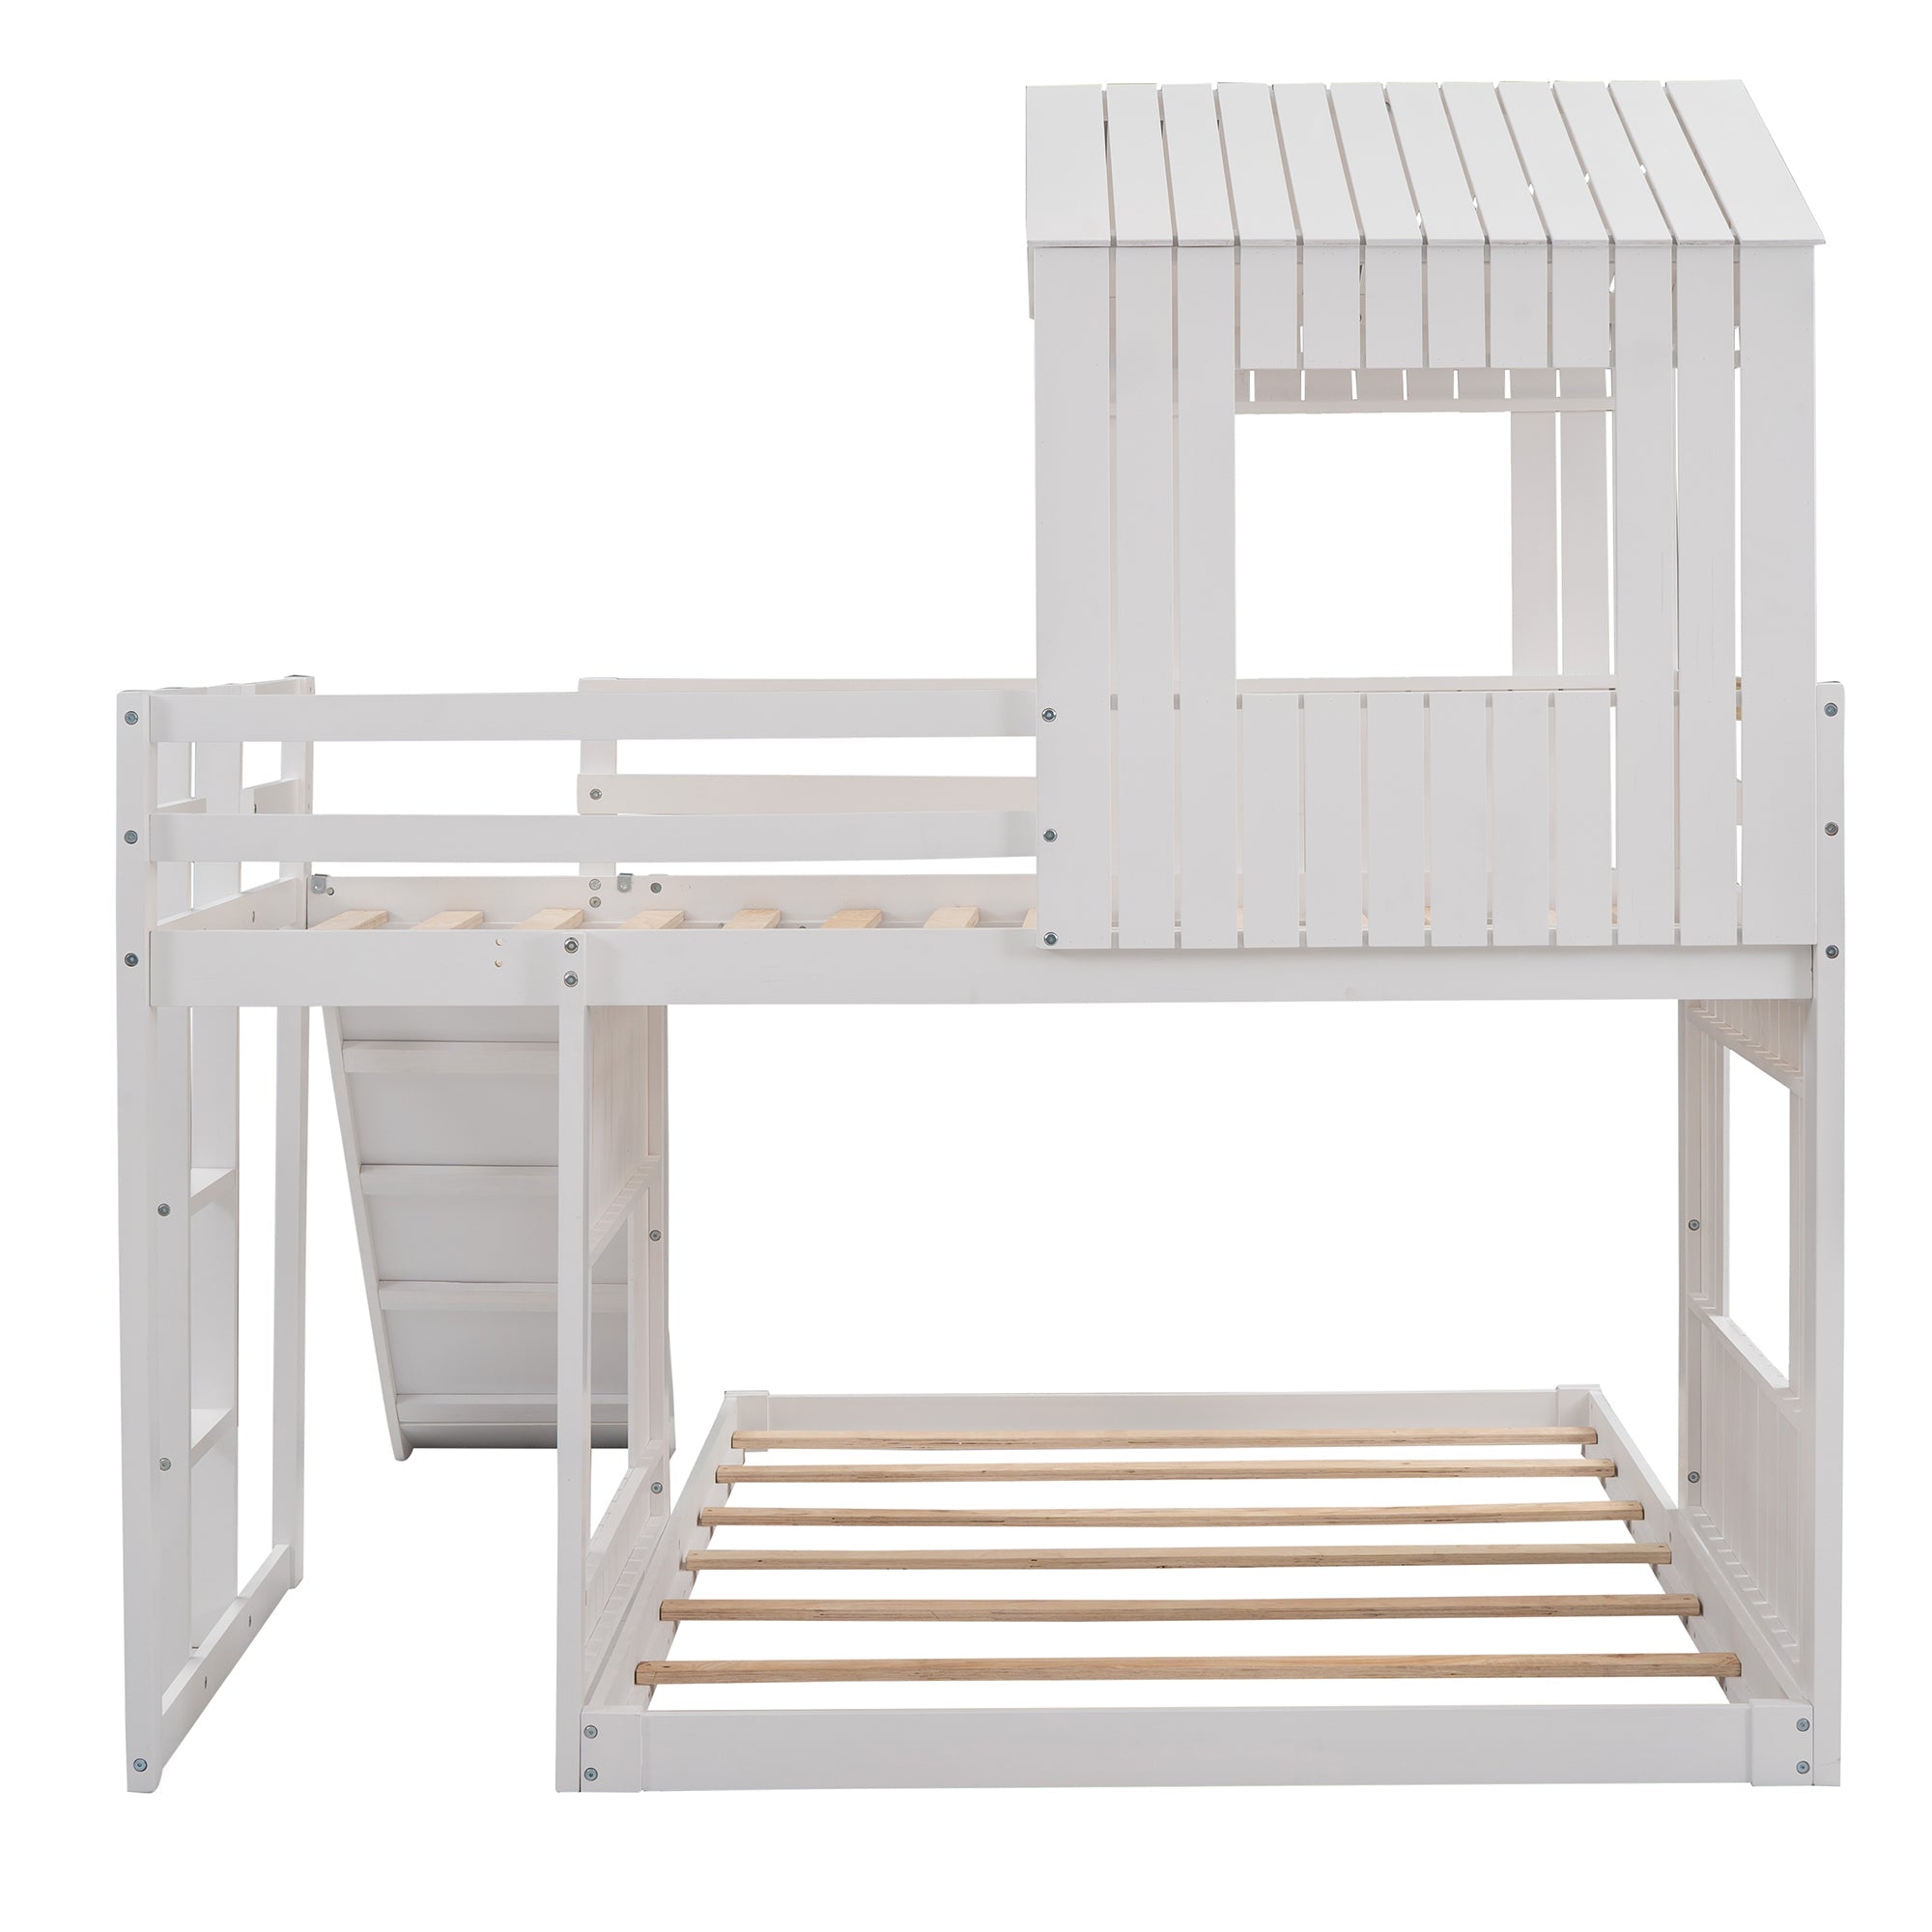 Churanty Twin Over Full Bunk Bed With Slide Wooden House Bunk Bed Playhouse Beds For Kids White